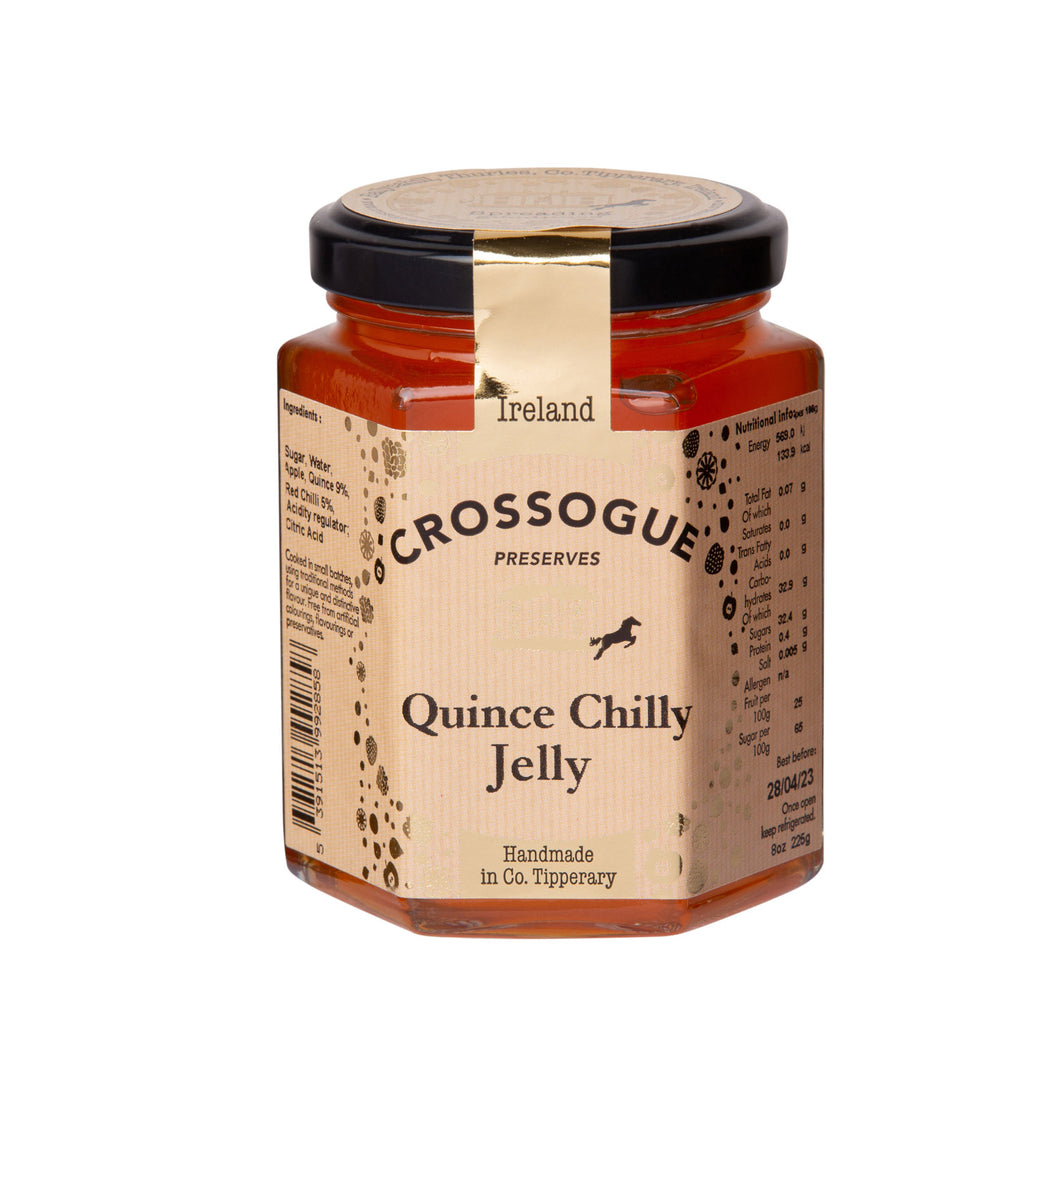 Quince Chilly Jelly